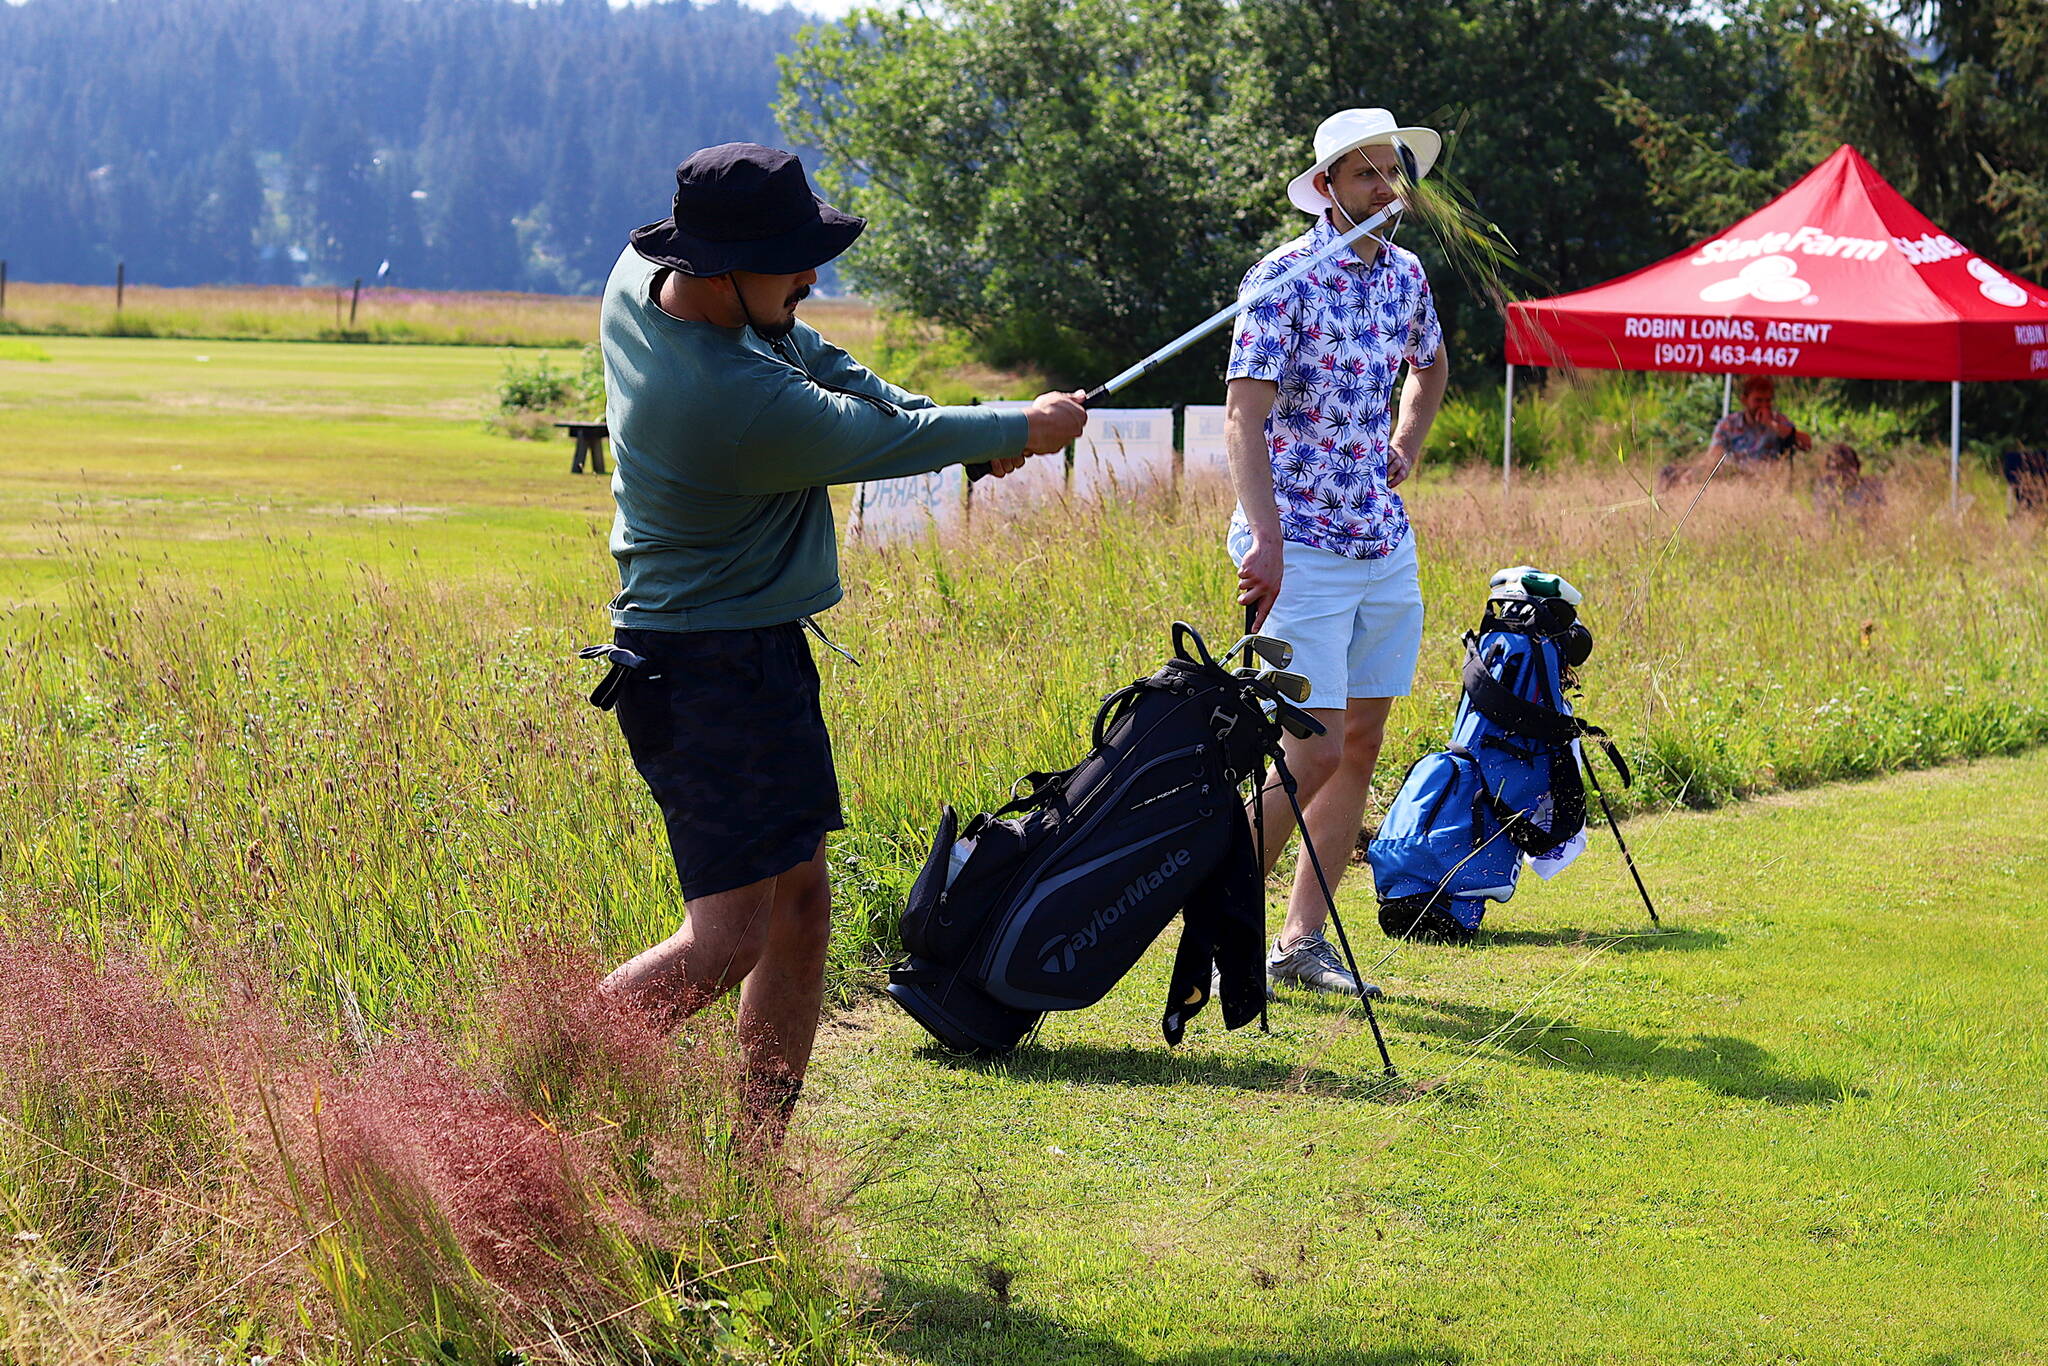 Alan Fisher takes out a big chunk of grass as hits a ball out of the rough as teammate Matt Seymour watches on the seventh hole of the Annual Greater Juneau Chamber of Commerce Golf Classic on Saturday at the Mendenhall Golf Course. (Mark Sabbatini / Juneau Empire)